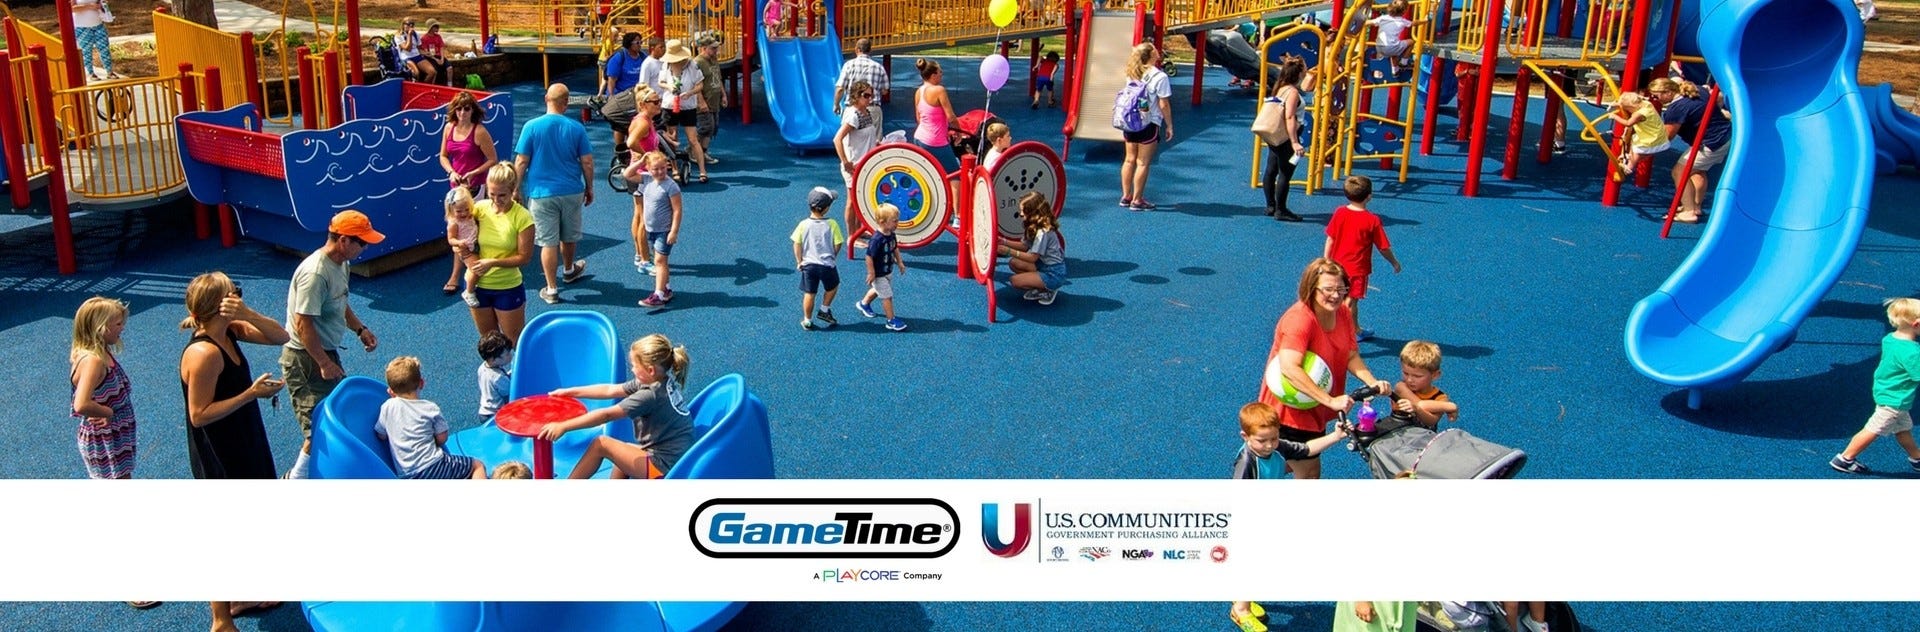 GameTime Awarded New Contract with U.S. Communities for Playground Equipment and Related Products